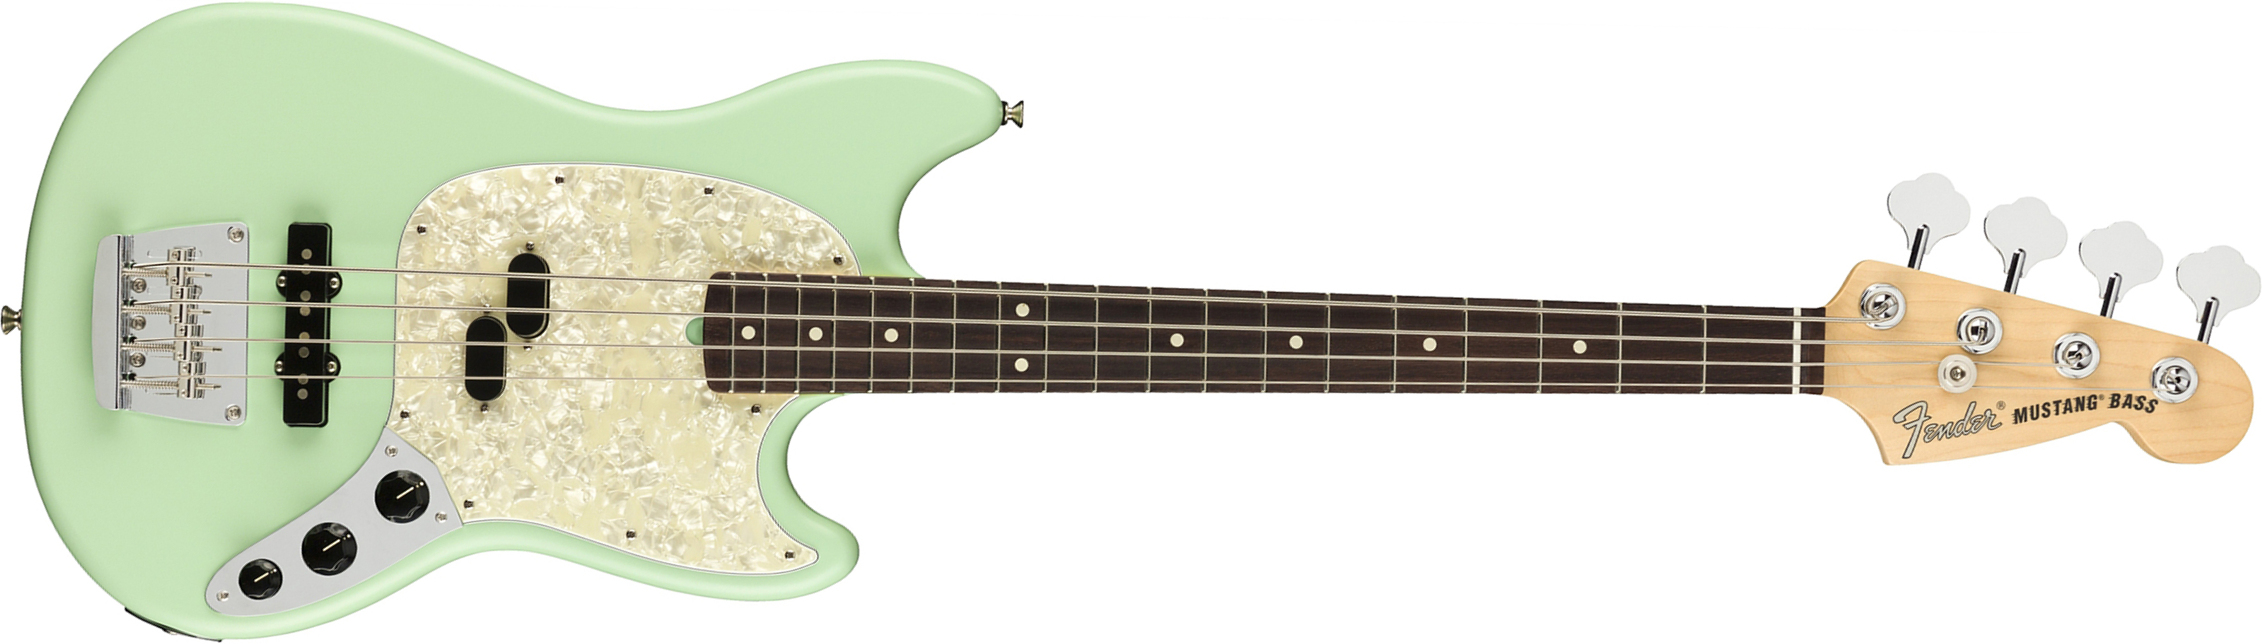 Fender Mustang Bass American Performer Usa Rw - Satin Surf Green - Basse Électrique Enfants - Main picture